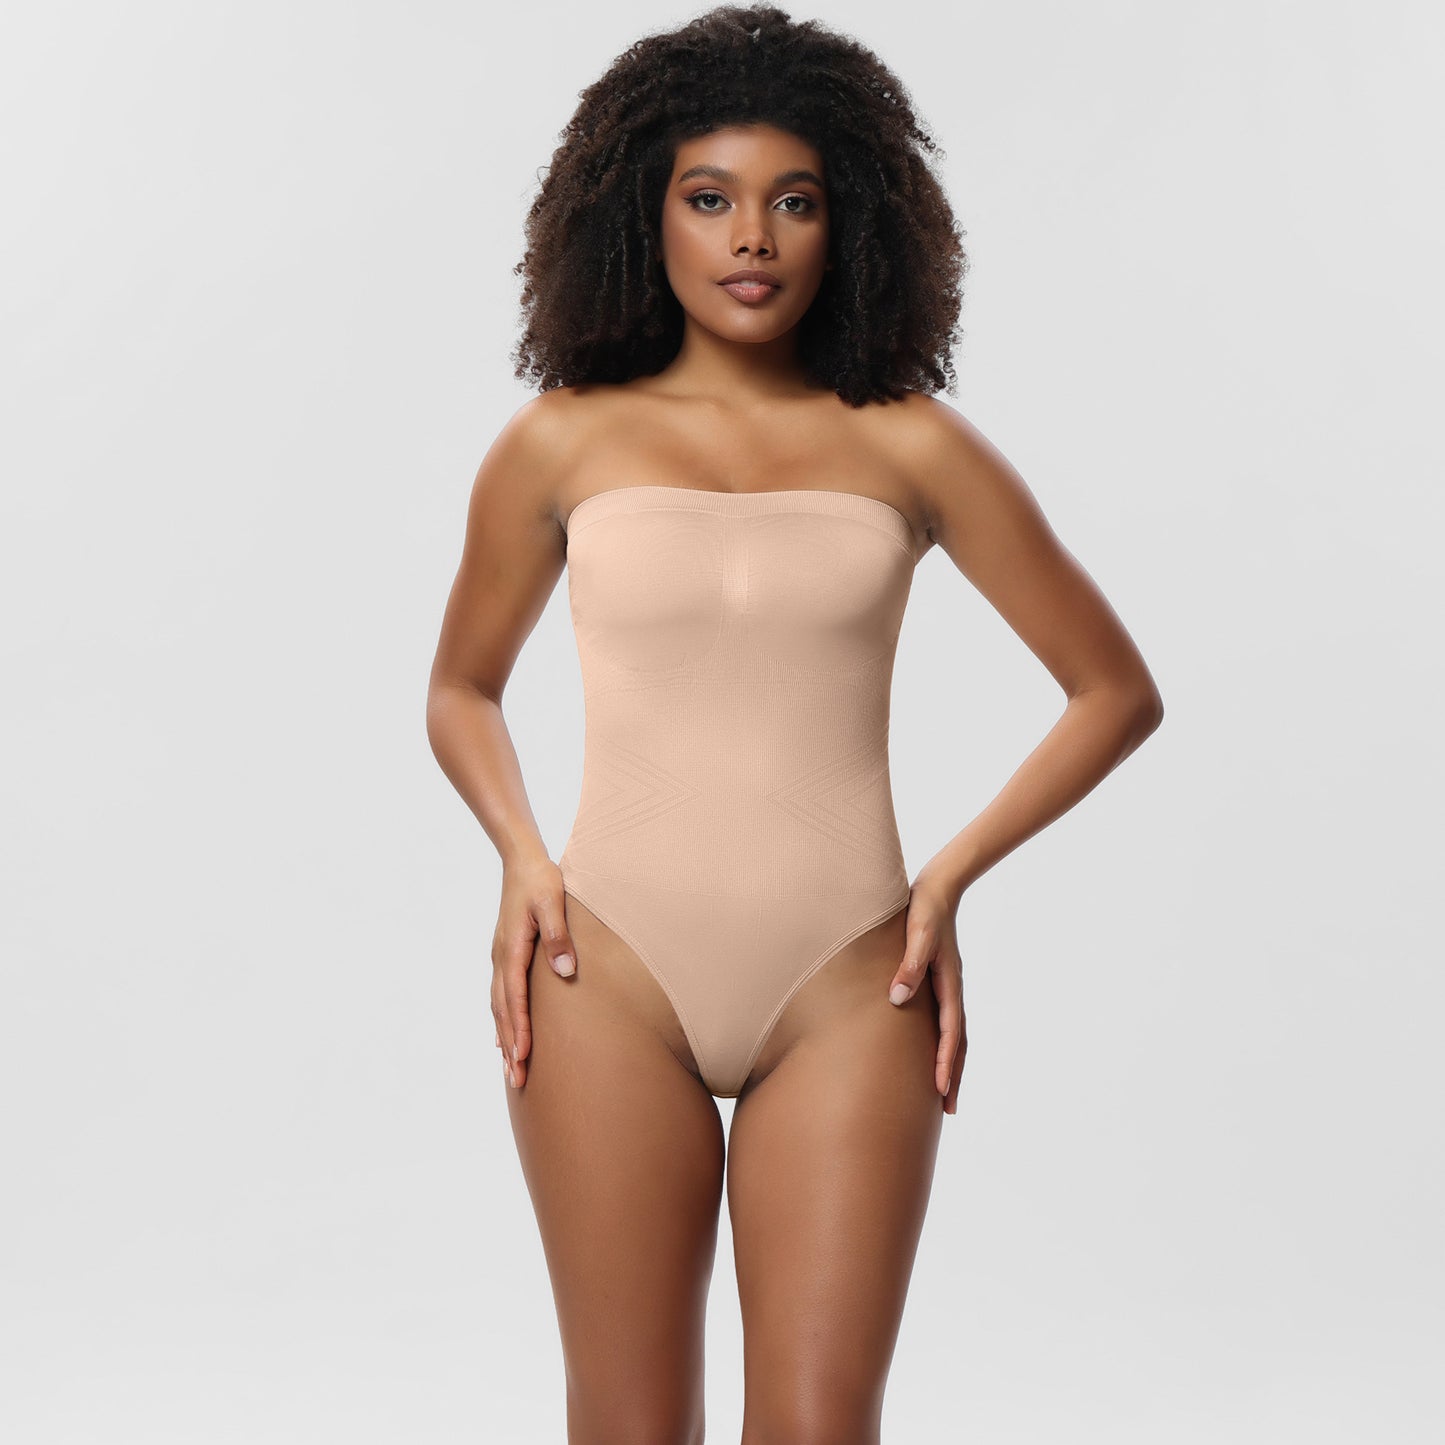 Cloud bras®Strapless Thong Body Shaper with Removable Straps